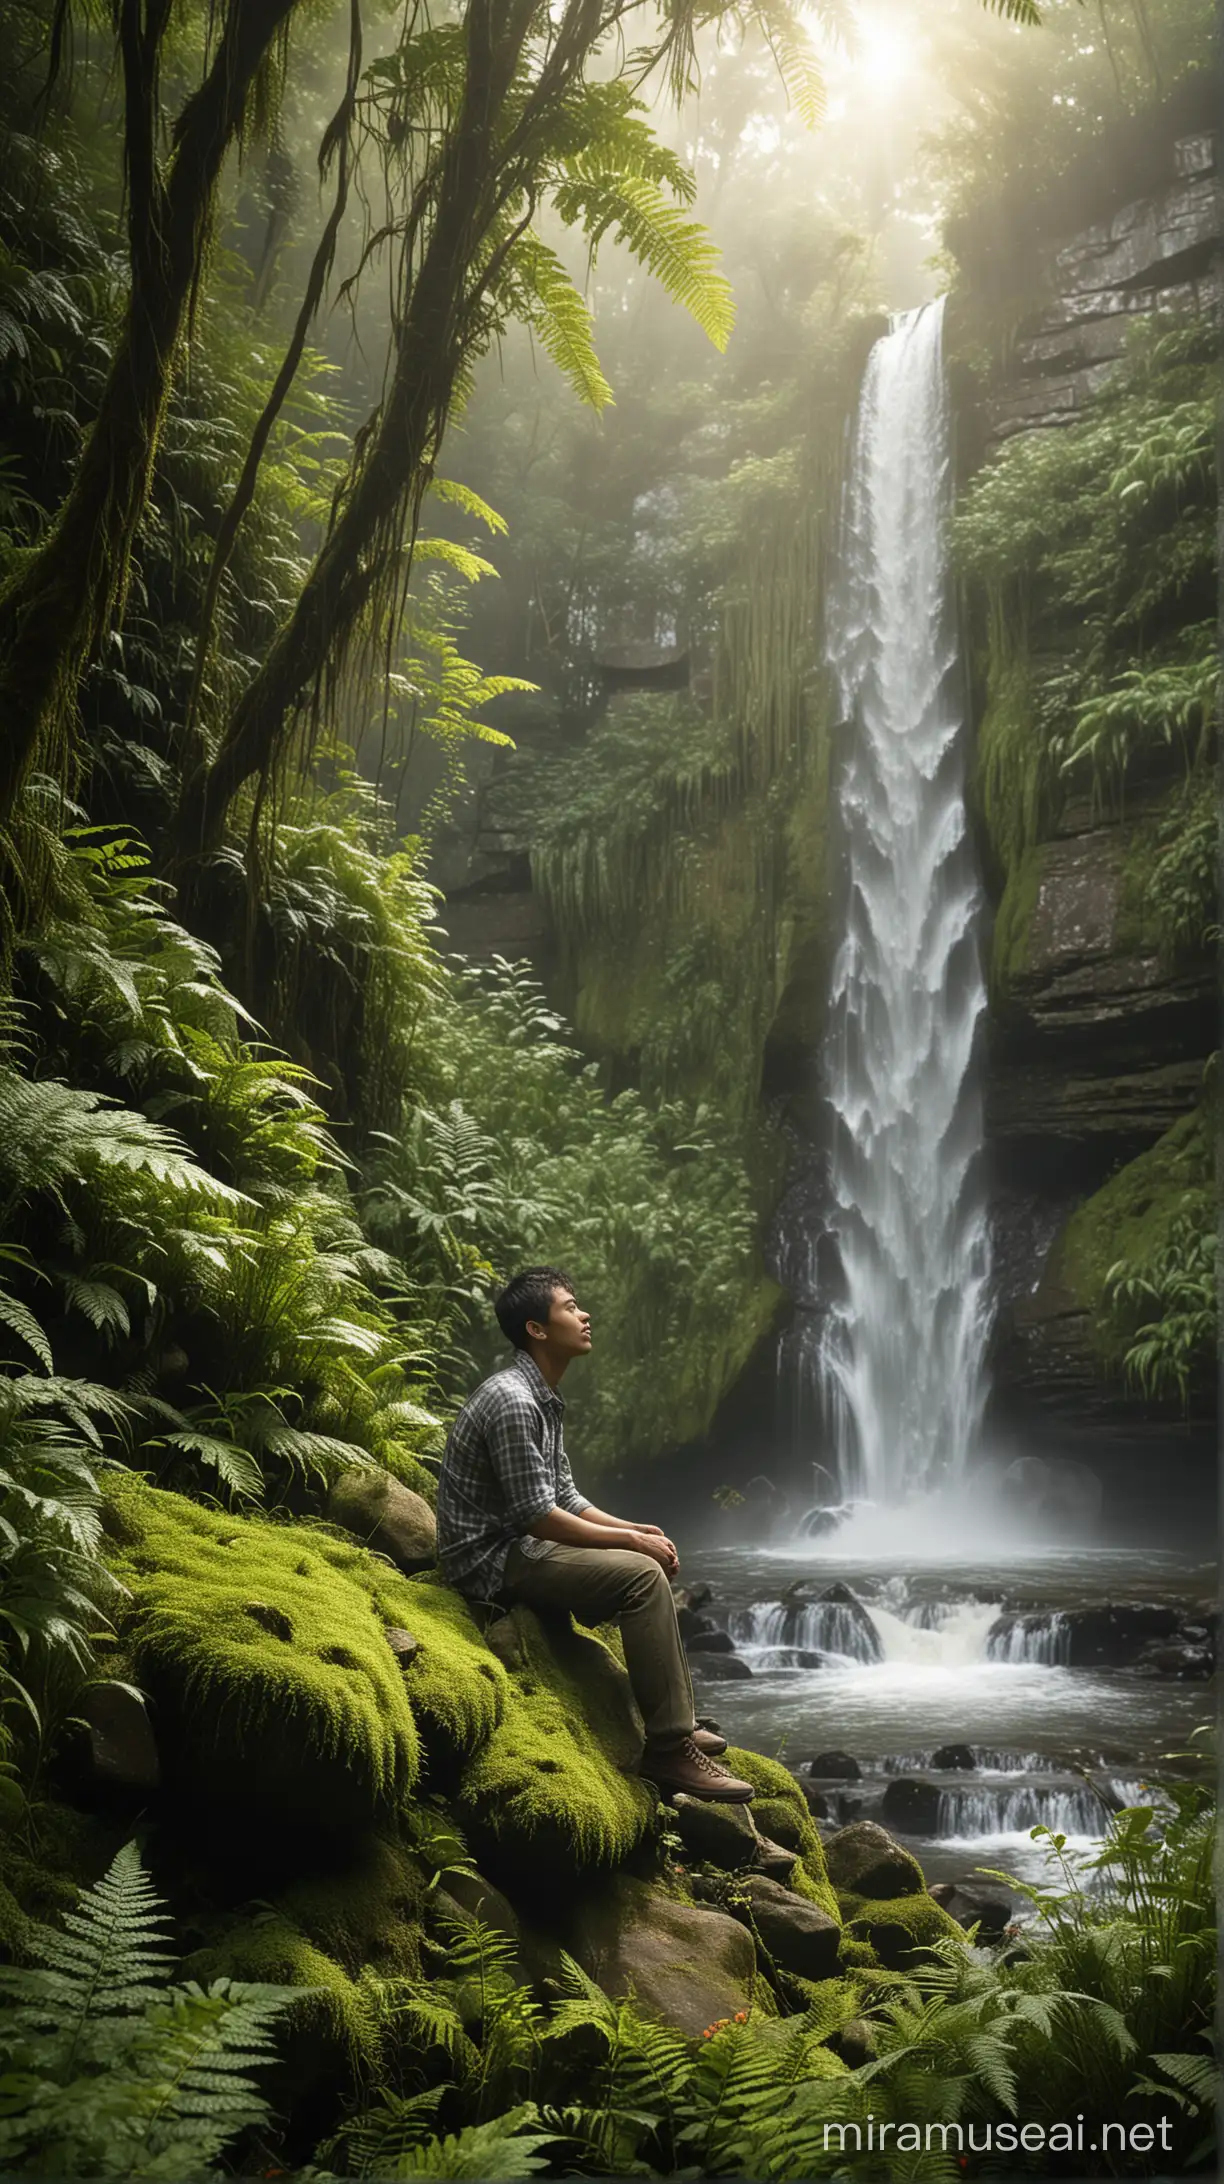 Indonesian young man sitting in the rock, front camera, gracefully in the middle of a forest filled with sunlight, the sun's rays filtering through the leaves. Delicate dewdrops cling to ferns and wildflowers. In the background, a mystical waterfall cascades down moss-covered rocks, and mist rises into the air. High resolution, high realism.